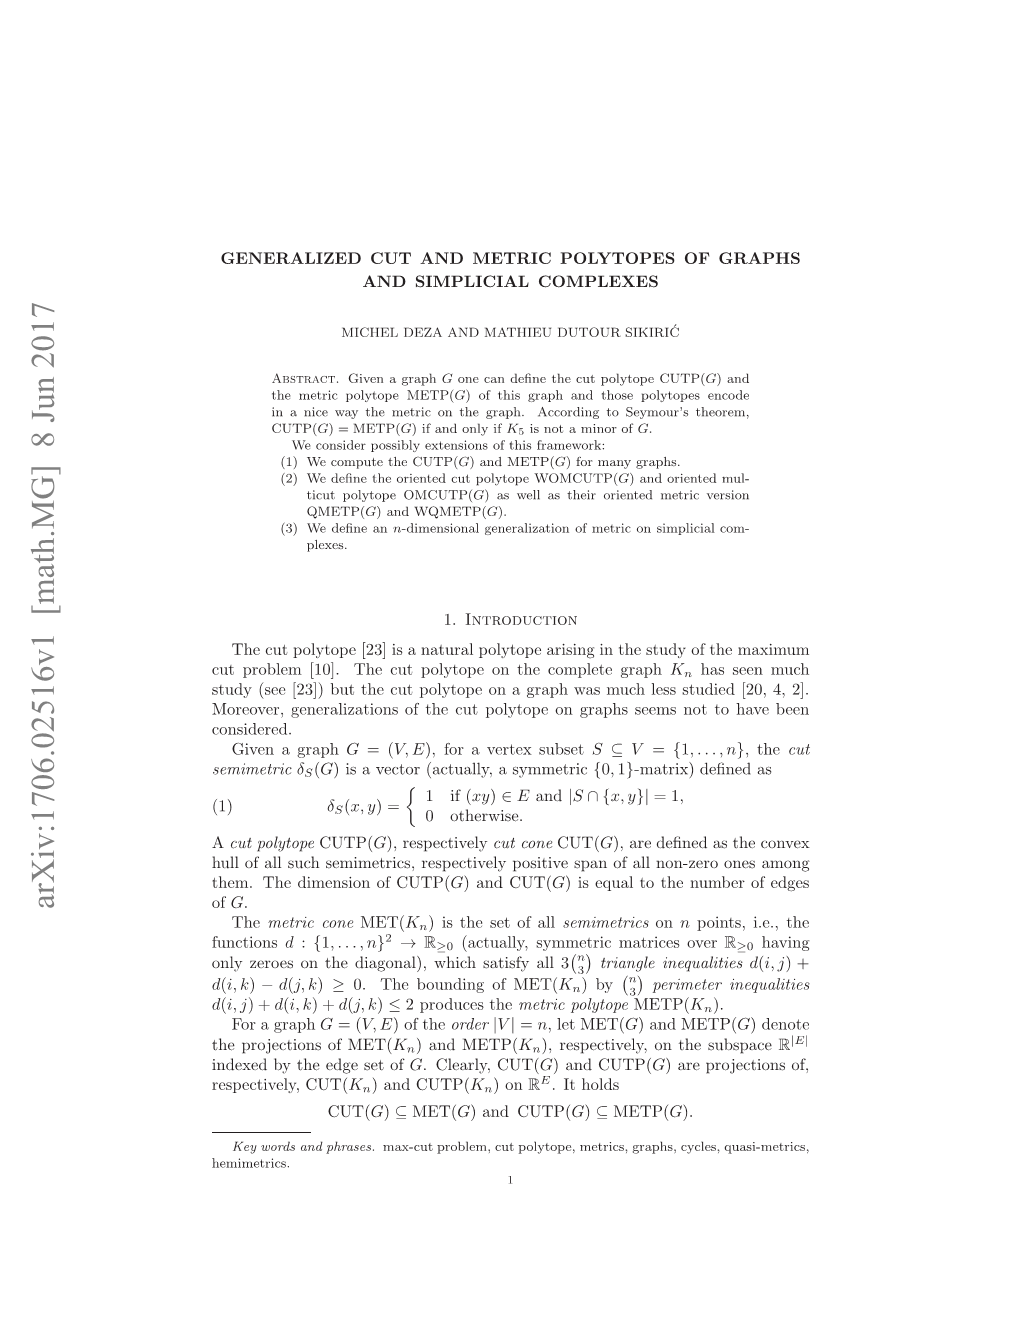 Generalized Cut and Metric Polytopes of Graphs and Simplicial Complexes3